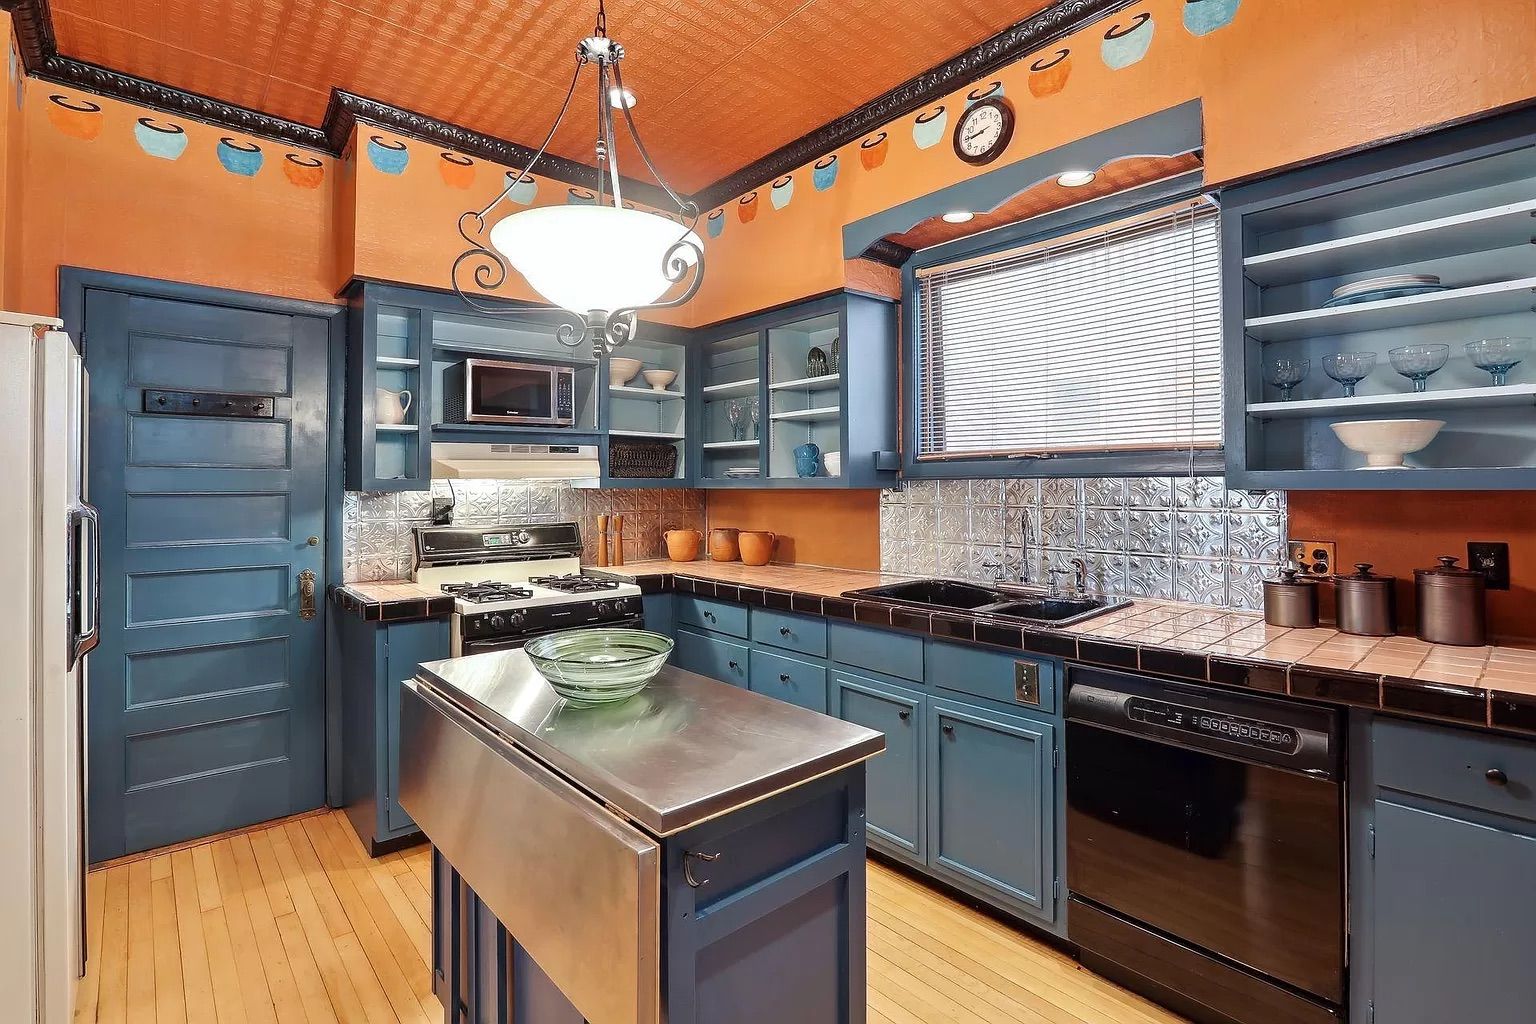 A photo of an orange kitchen with blue cabinets.